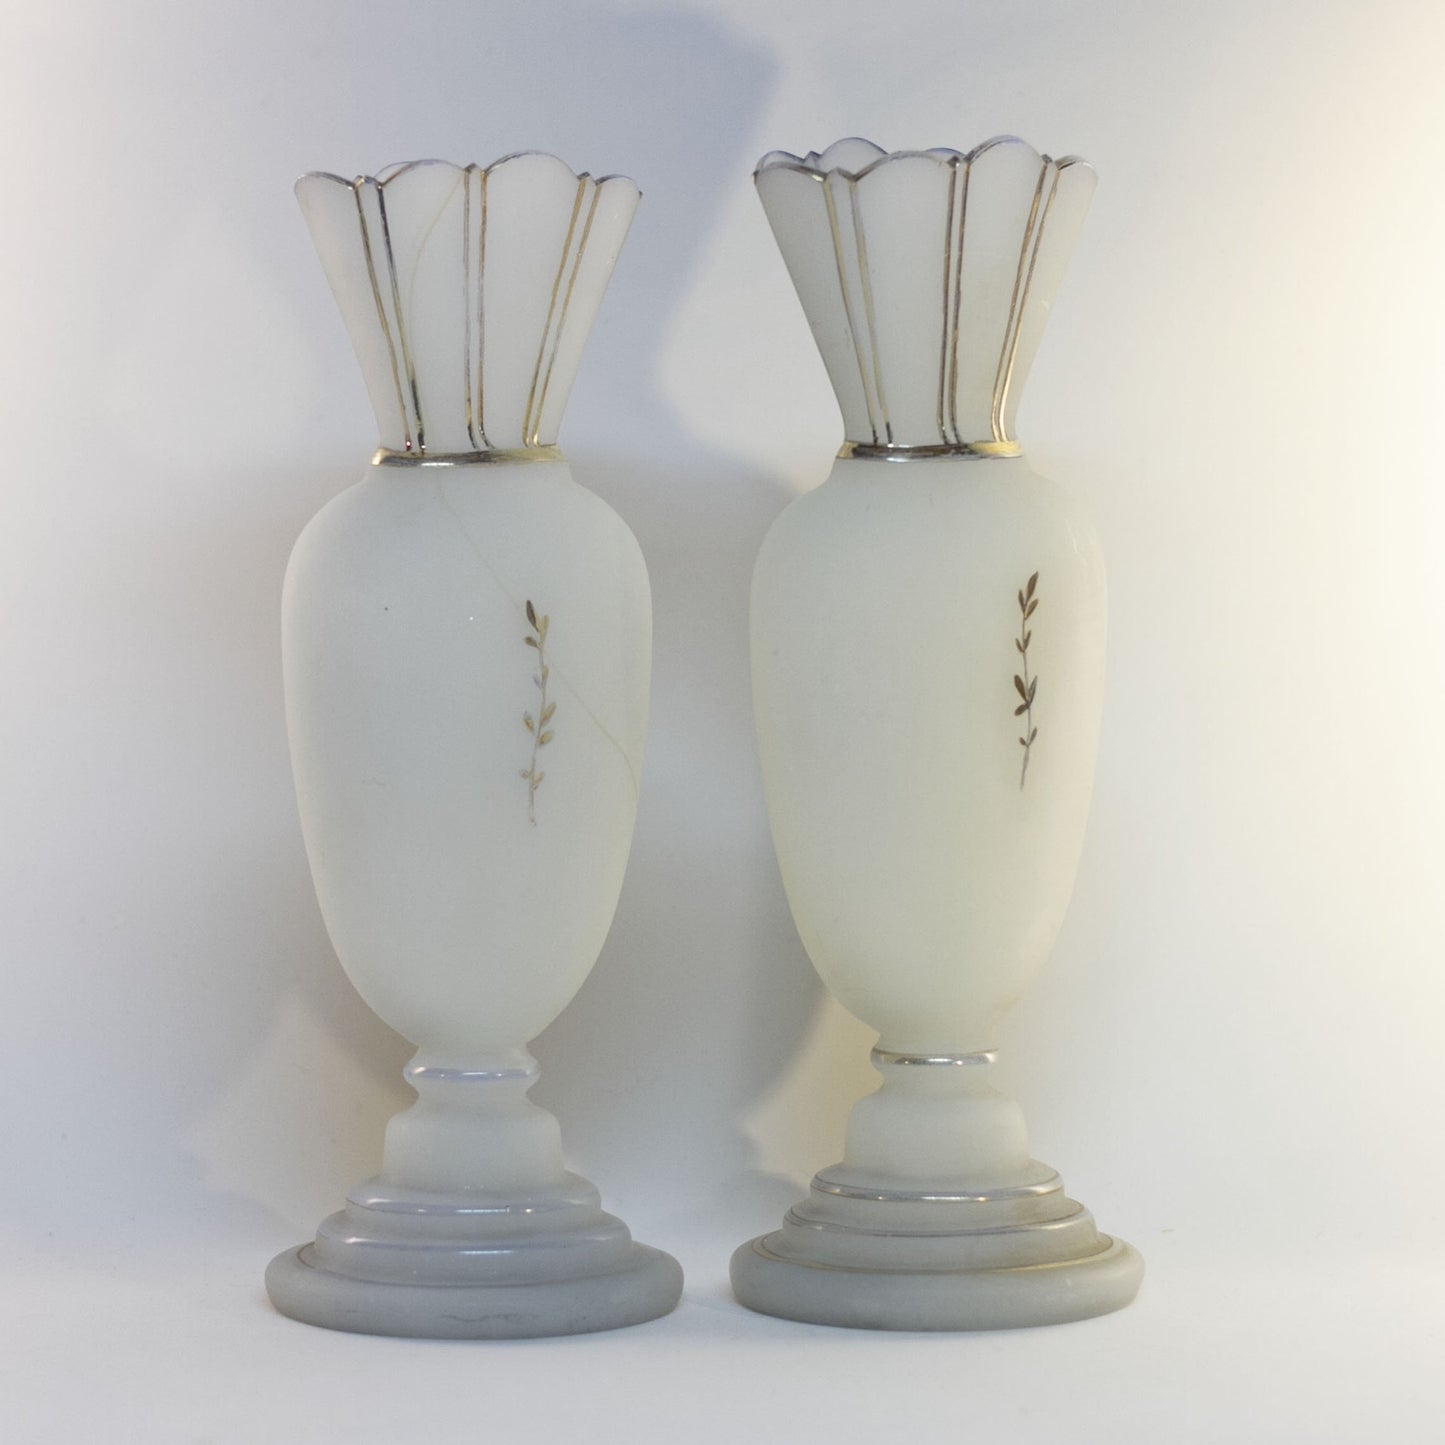 Pair of Late 19th Century Victorian Era BRISTOL GLASS WHITE MANTLE VASES Hand-Painted Cherries and Blossoms